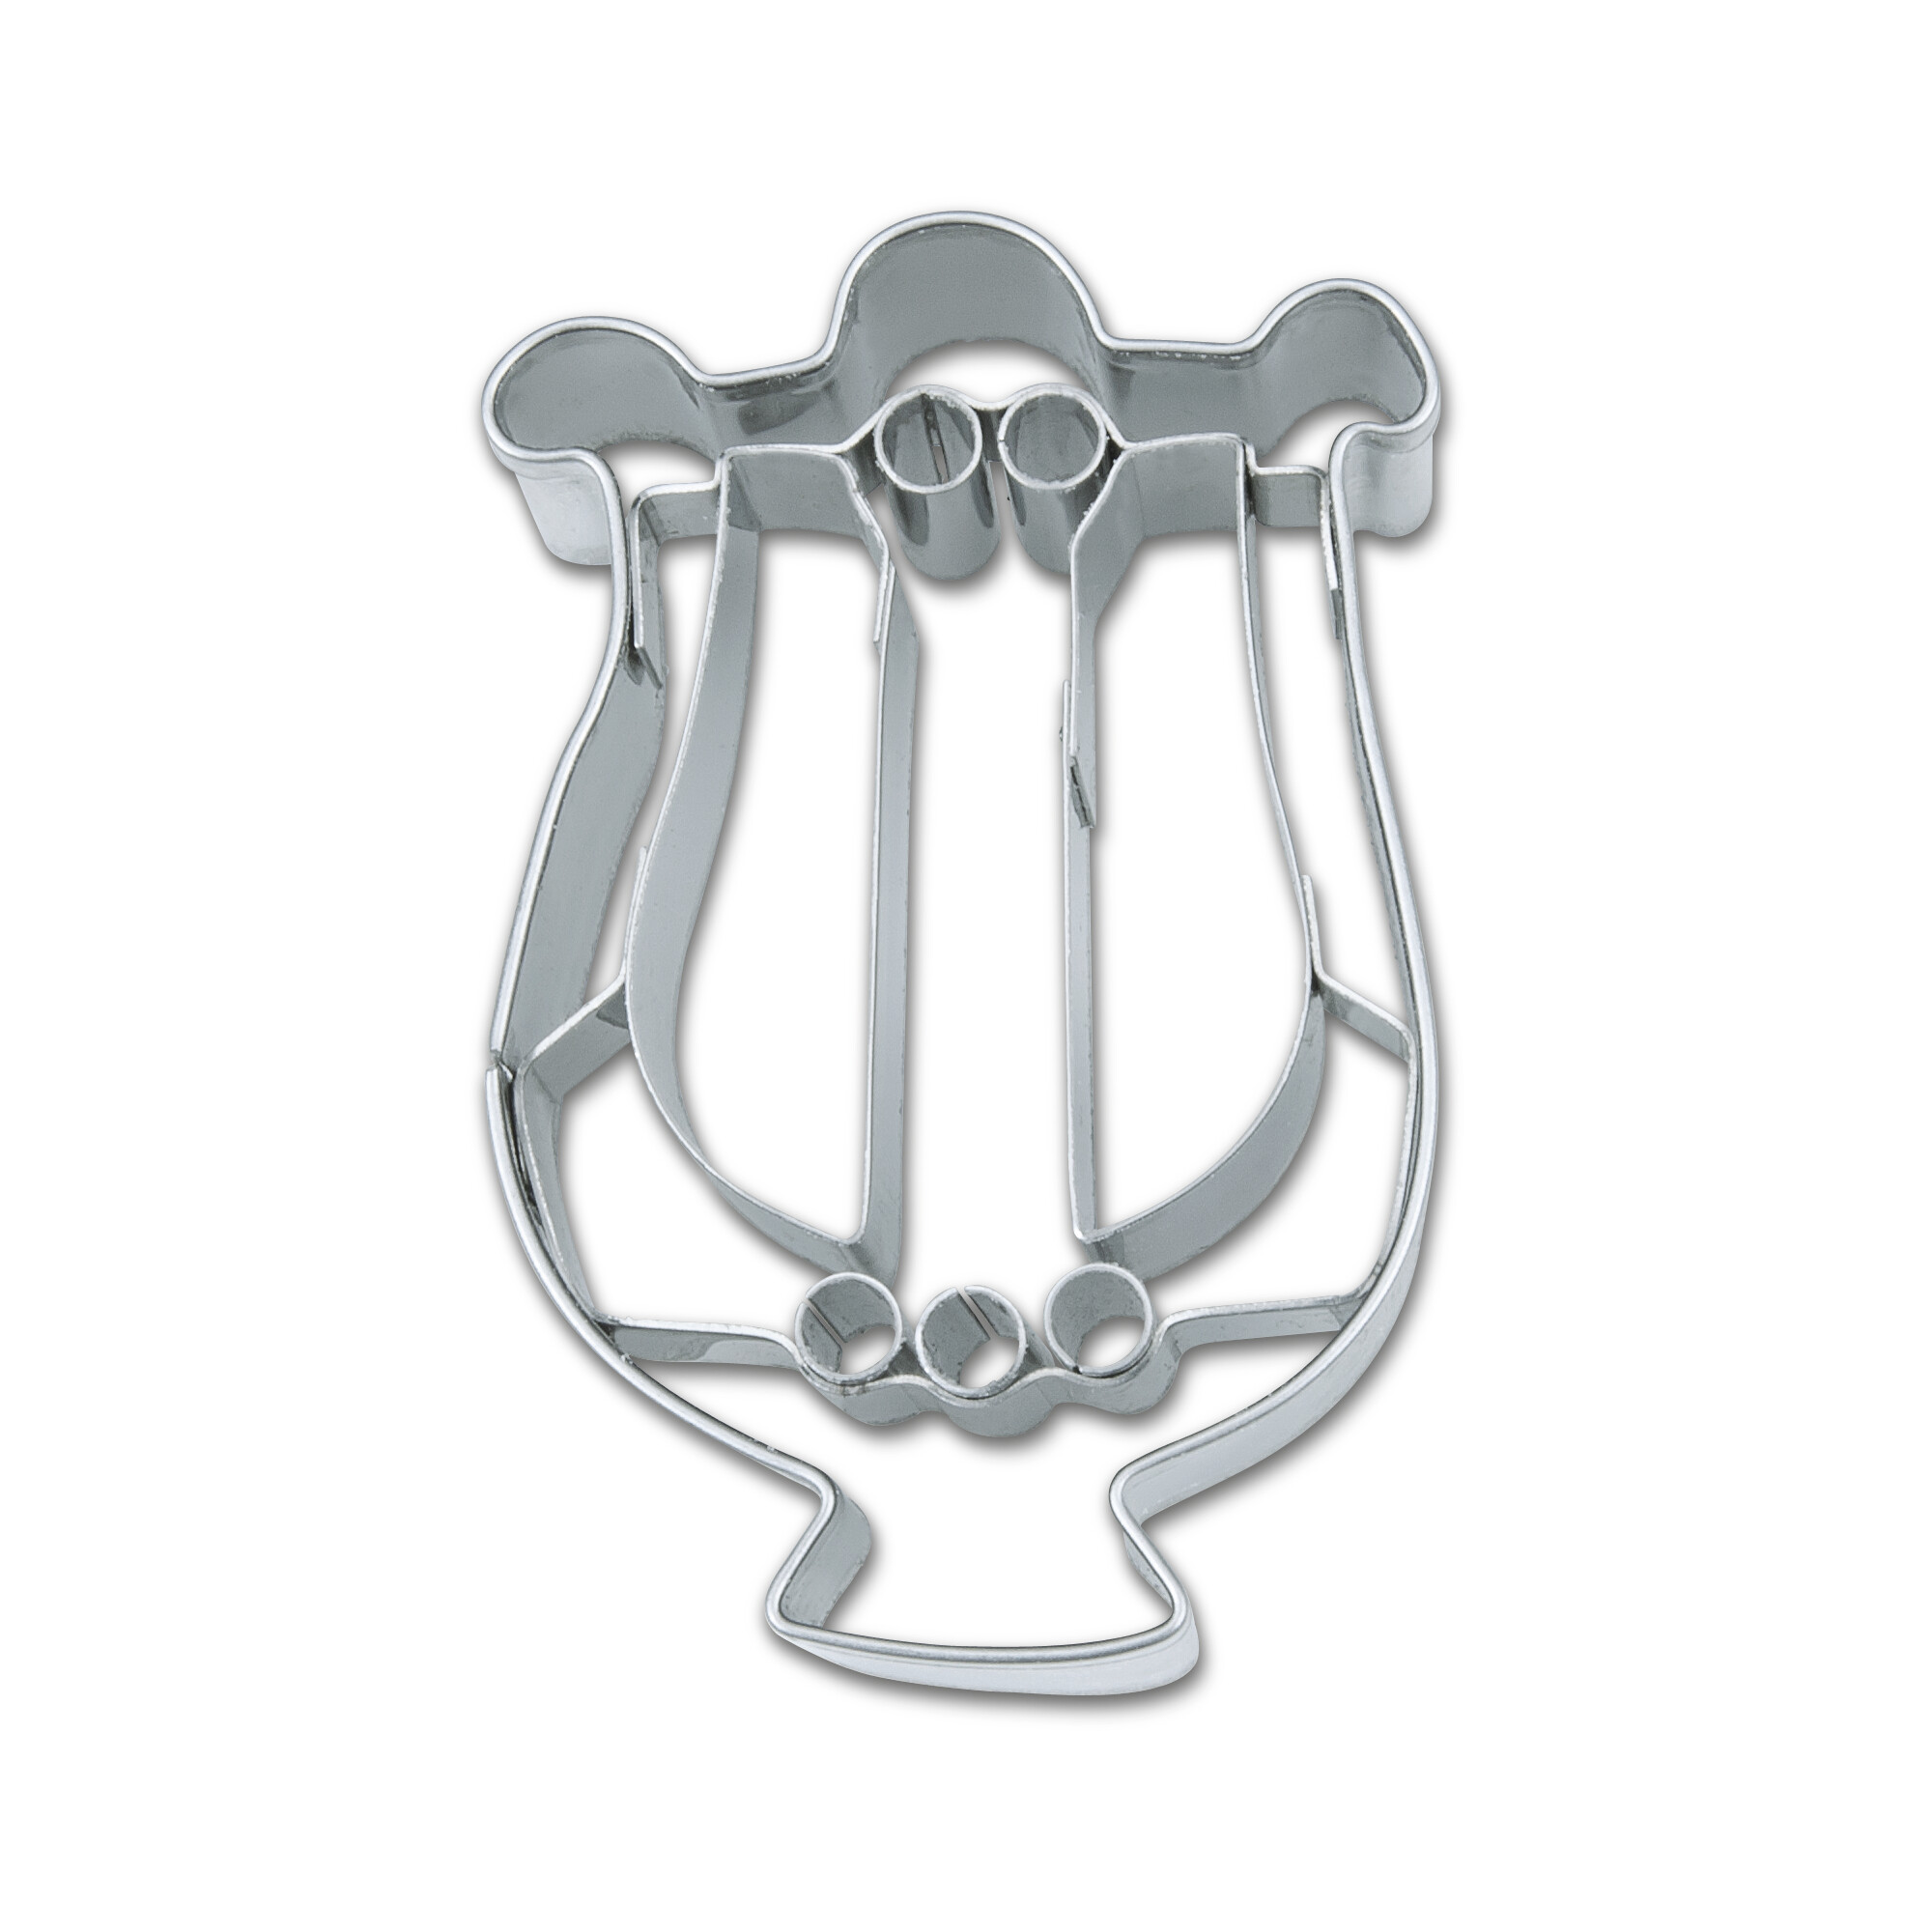 Cookie cutter with stamp – Lyre